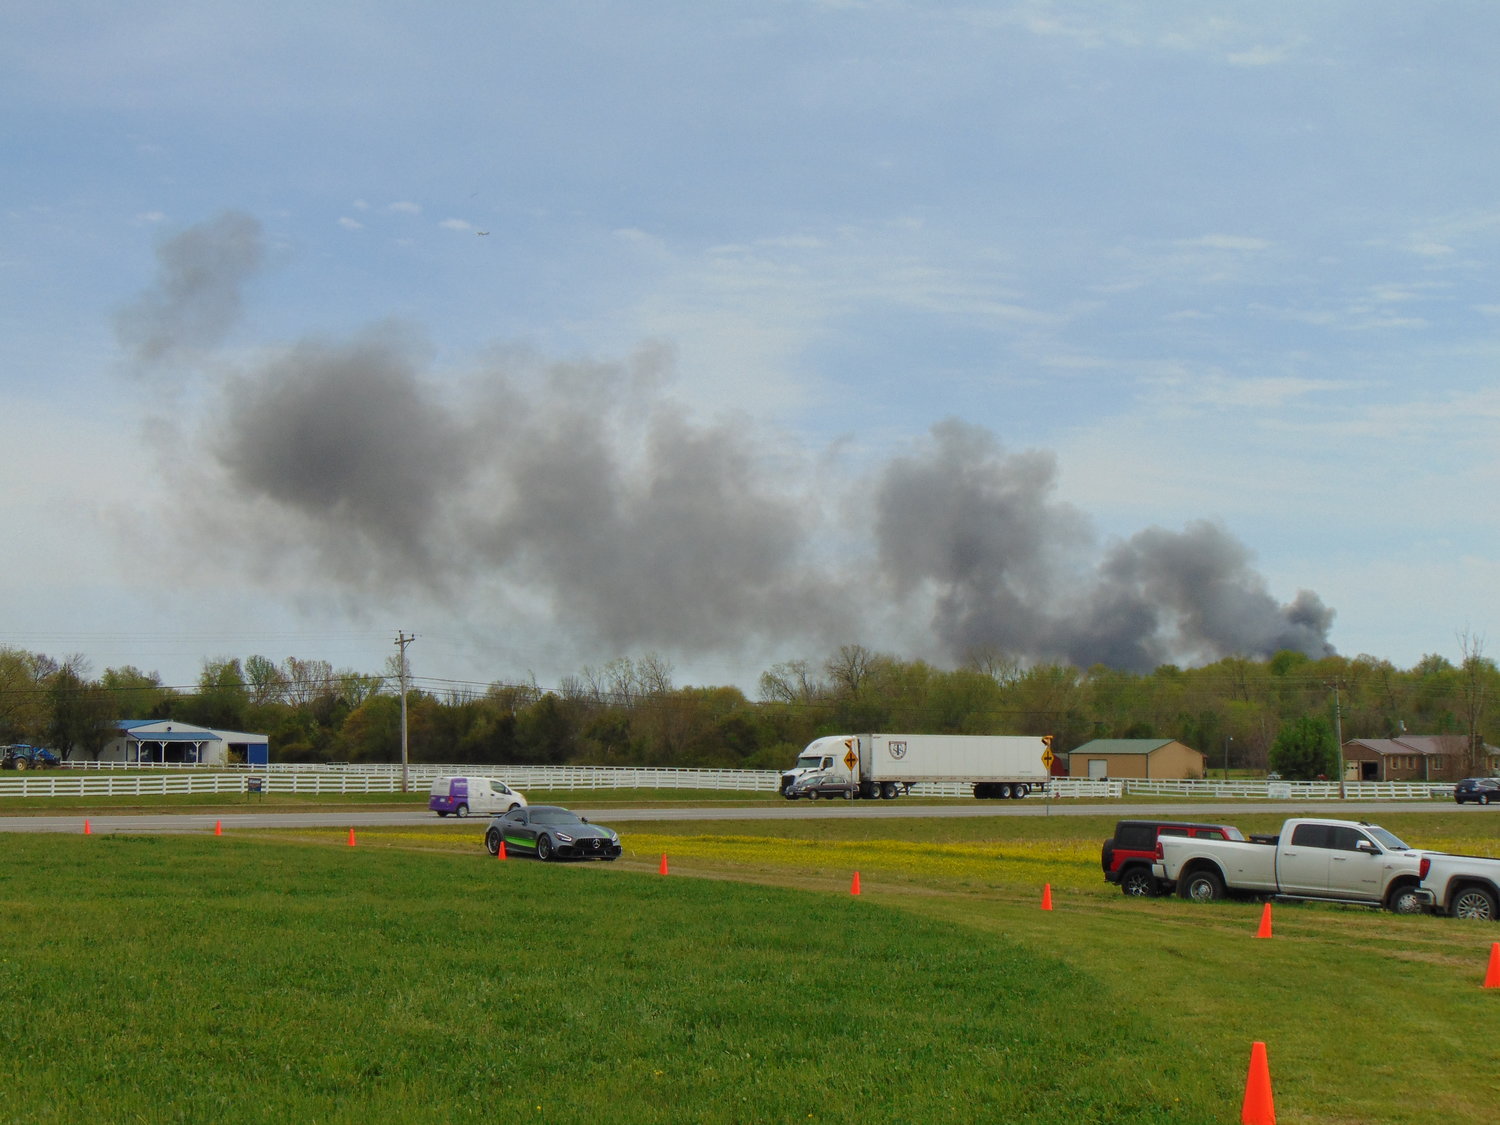 Smoke was visible at the intersection of U.S. 231 and Eady Road.